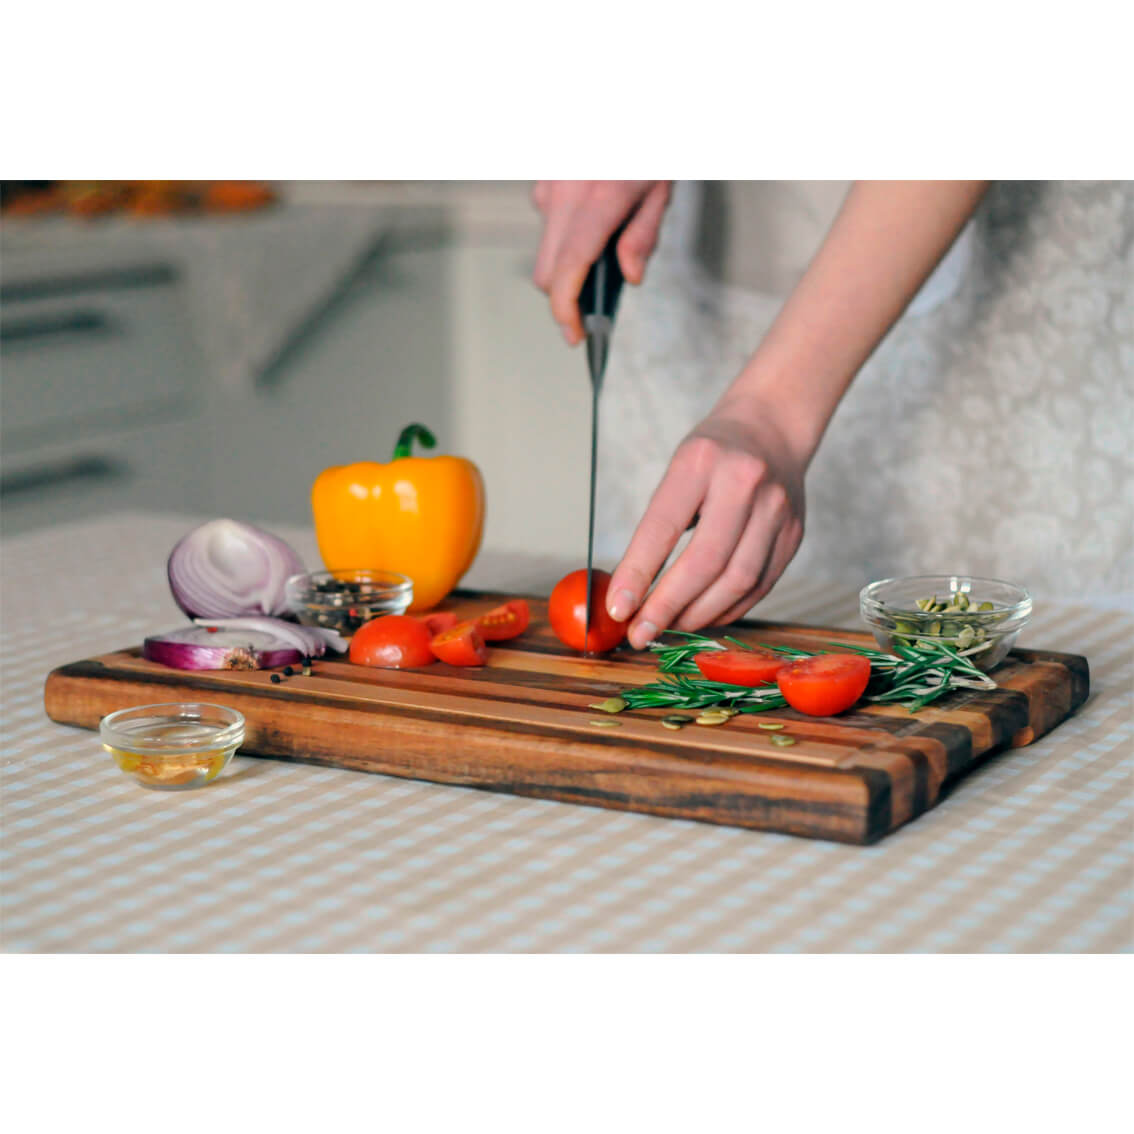 Perfect Wooden chopping board for your kitchen!